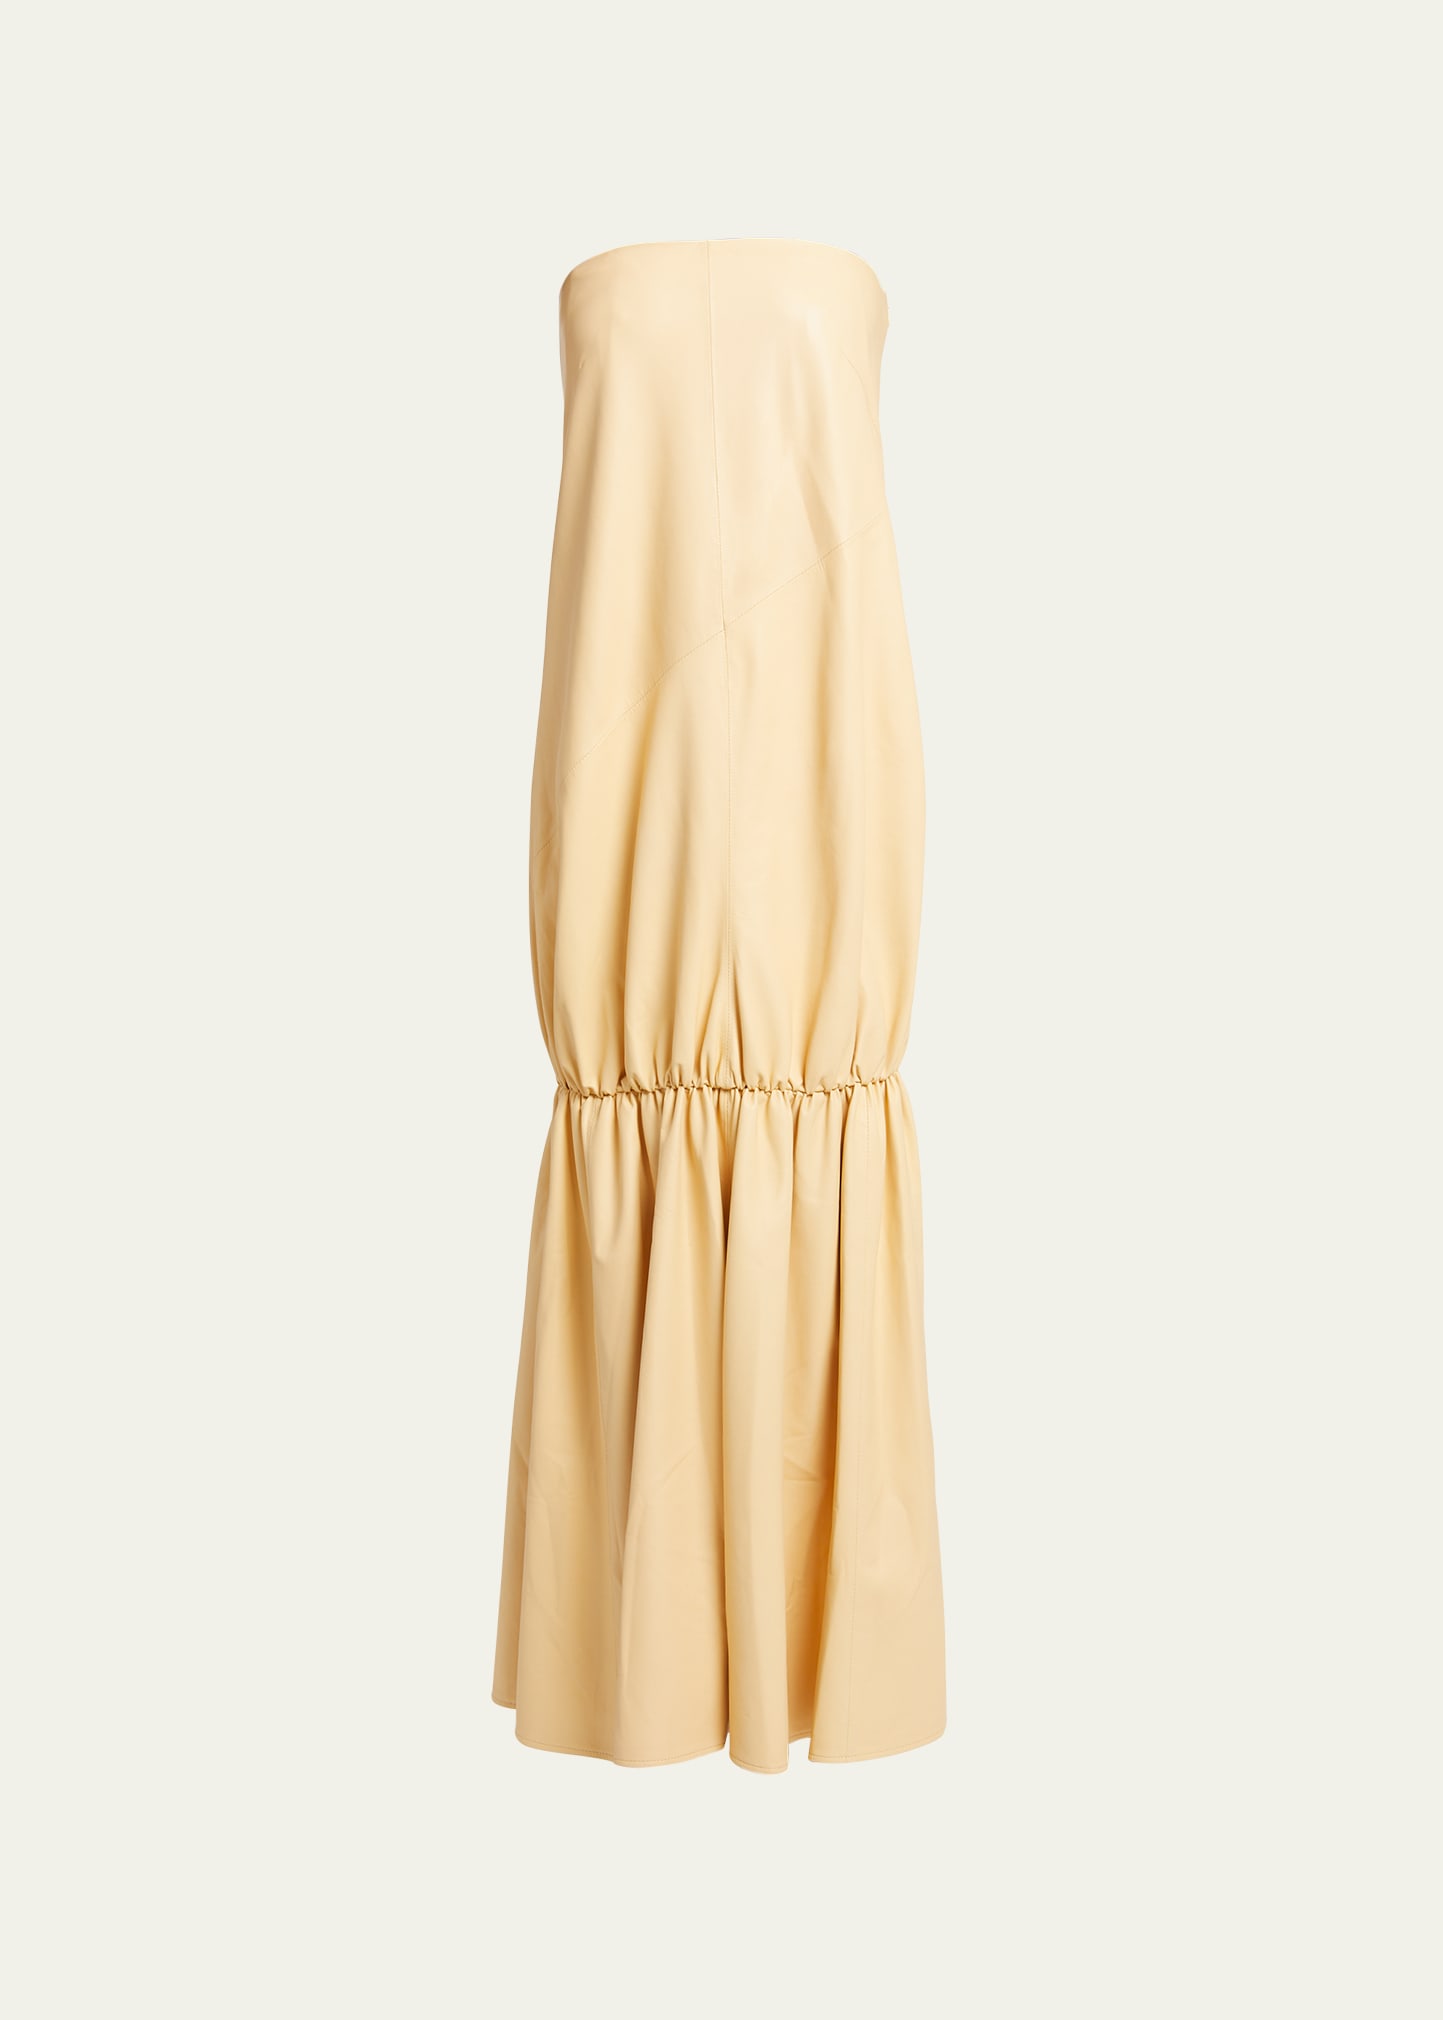 Proenza Schouler Margot Strapless Glossy Leather Dress In Resin